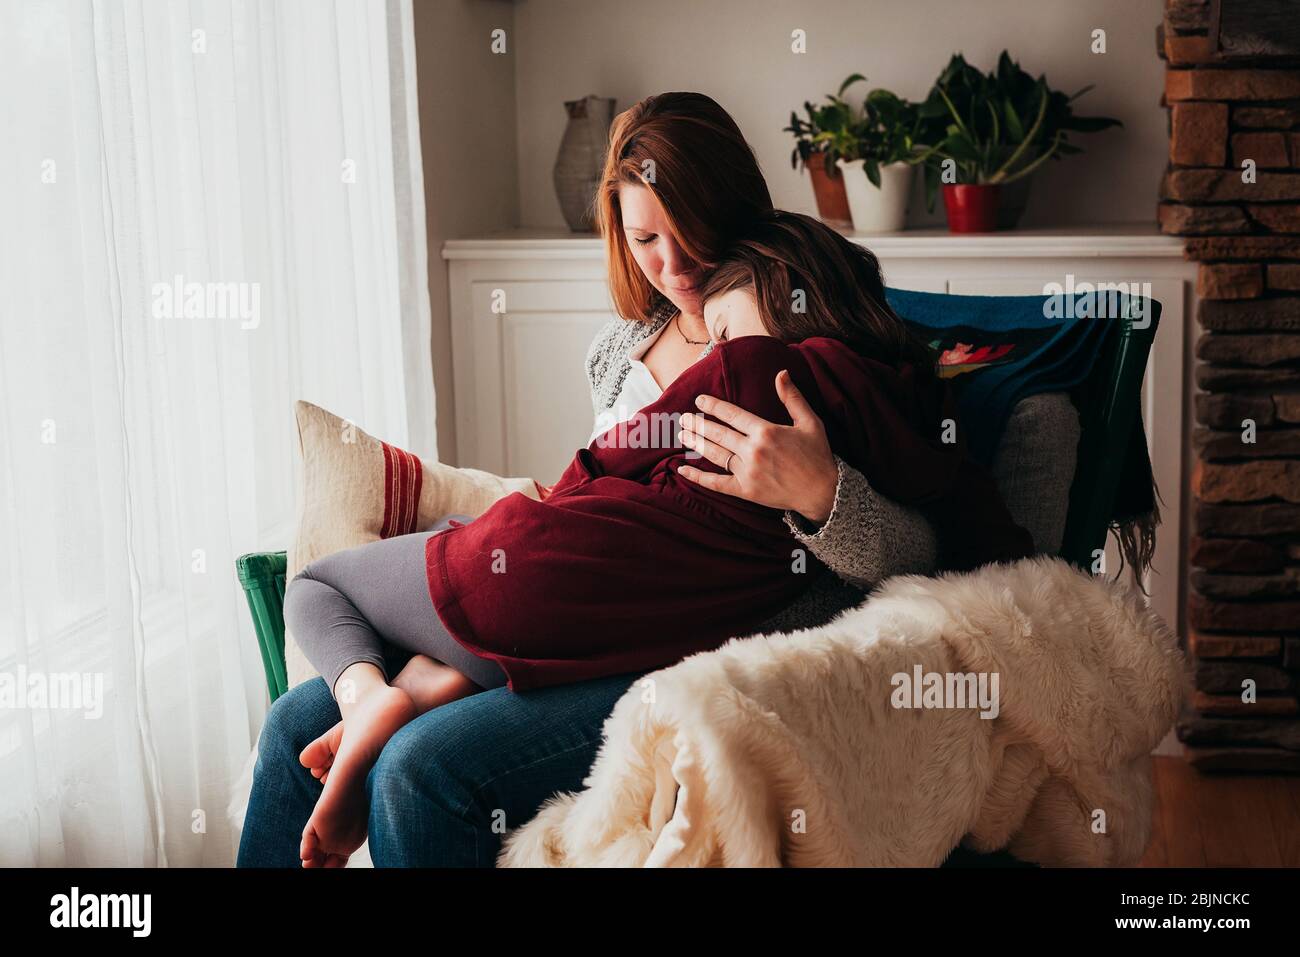 Girl sitting on her mother's lap Stock Photo